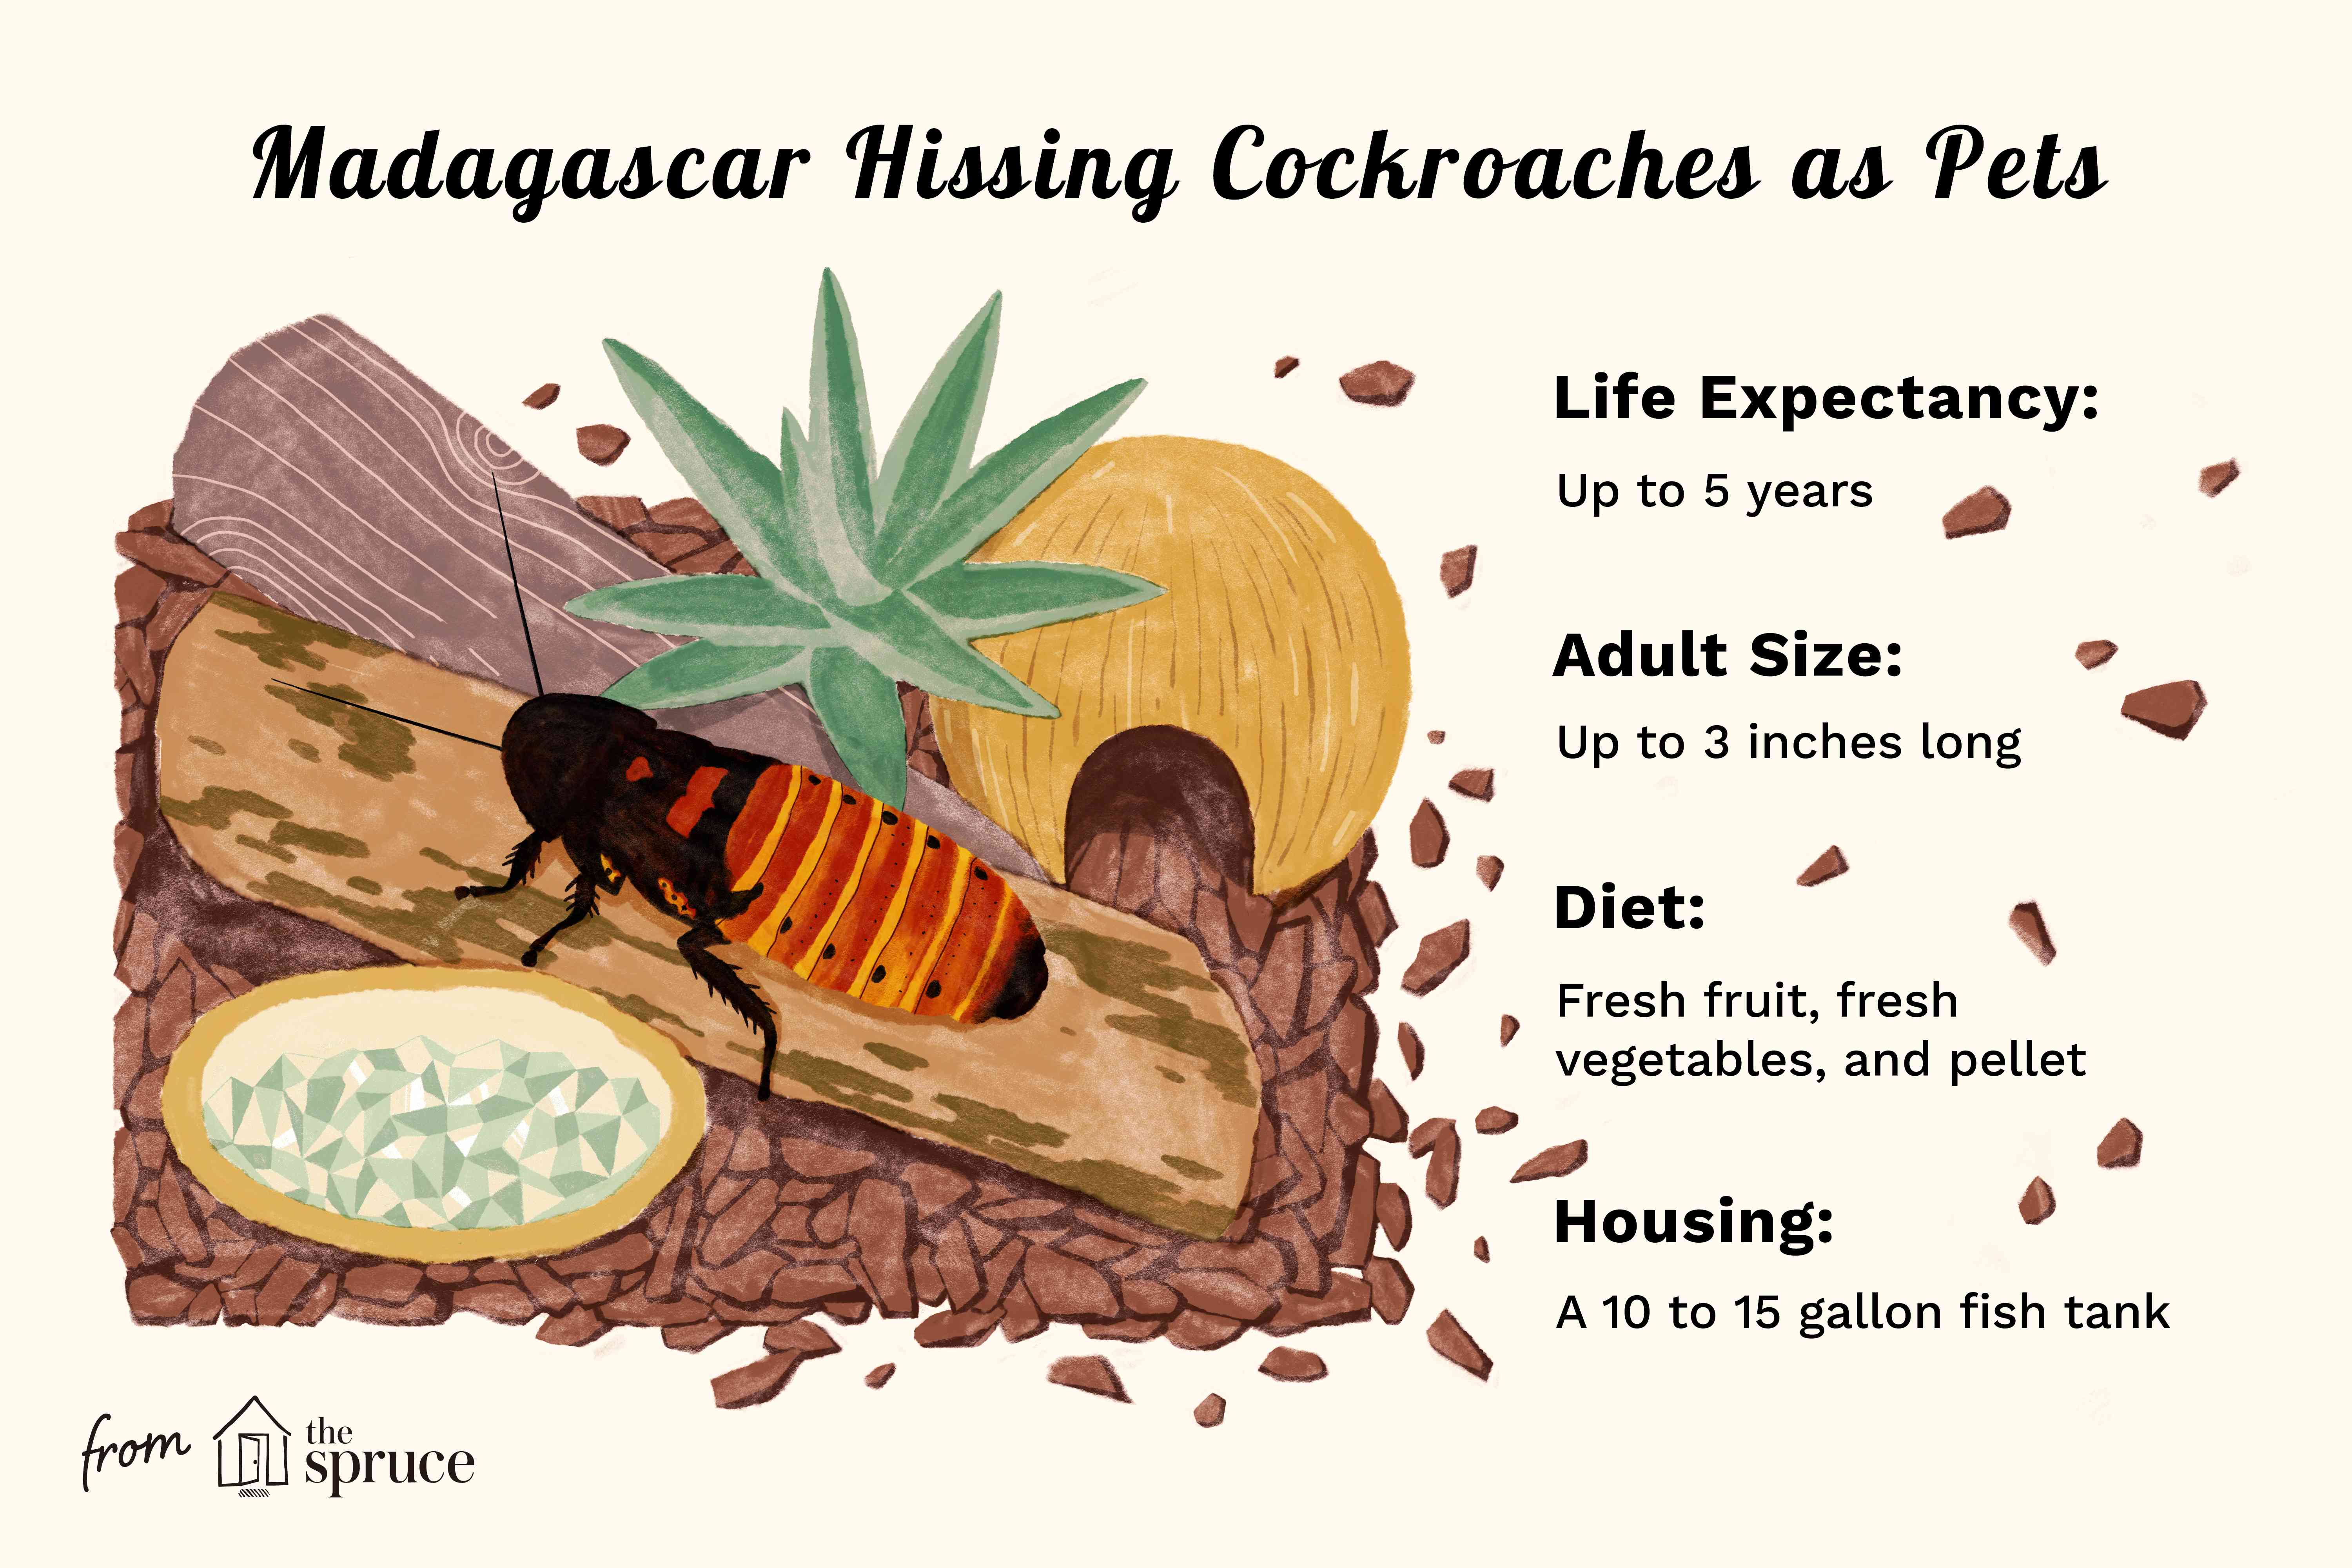 madagascar hissing cockroaches as pets